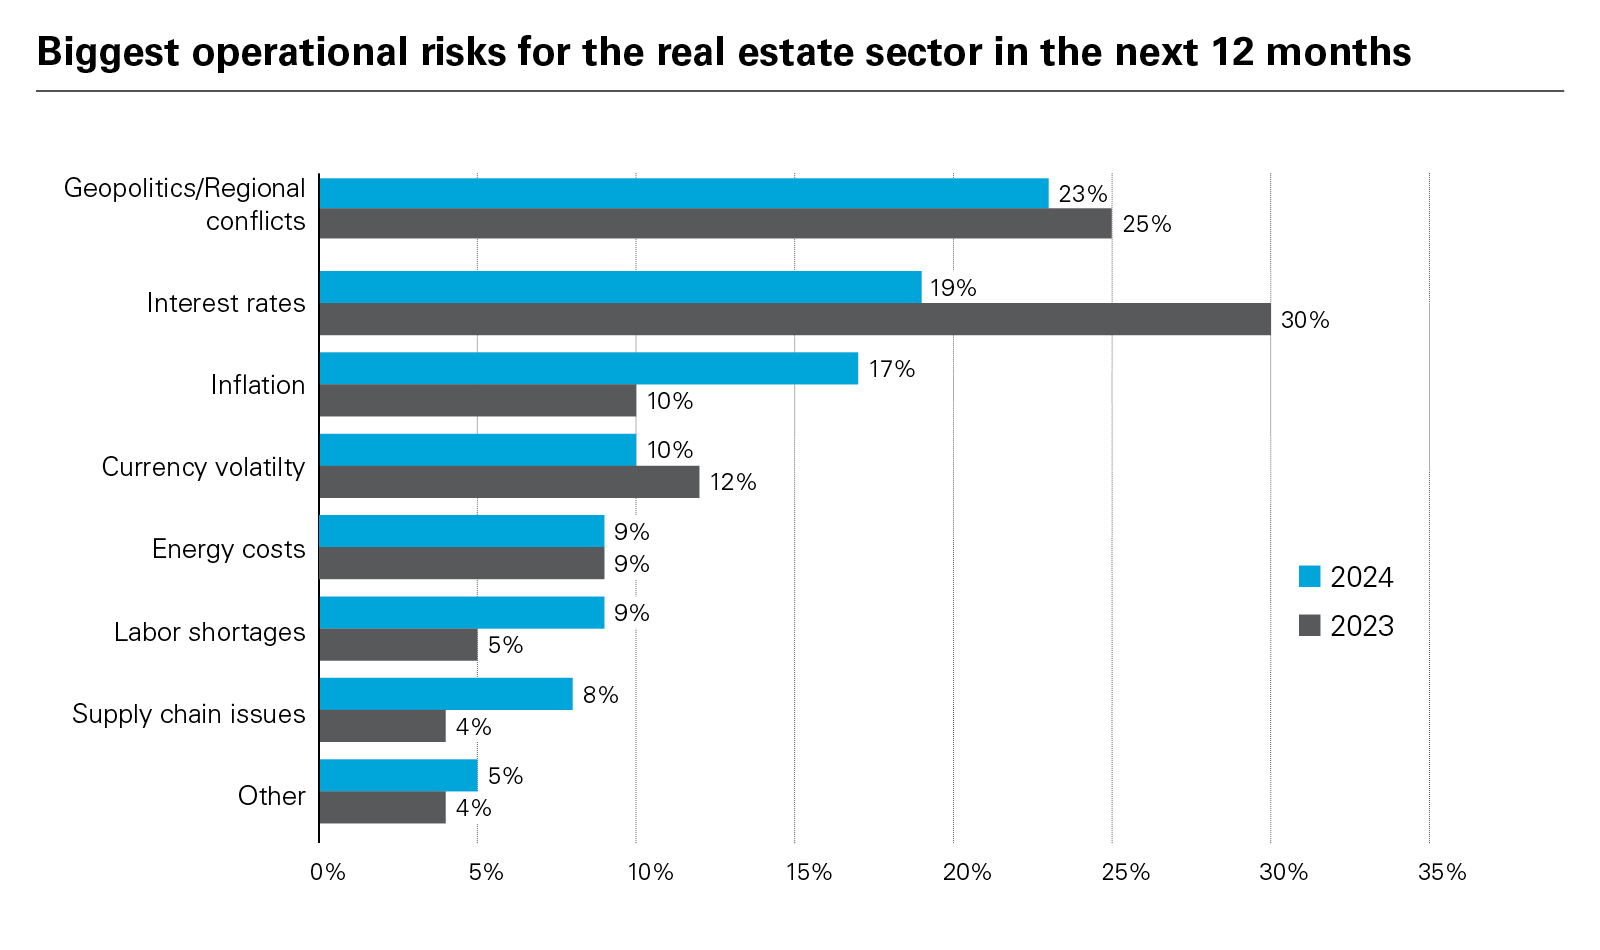 Biggest operational risks for the real estate sector in the next 12 months